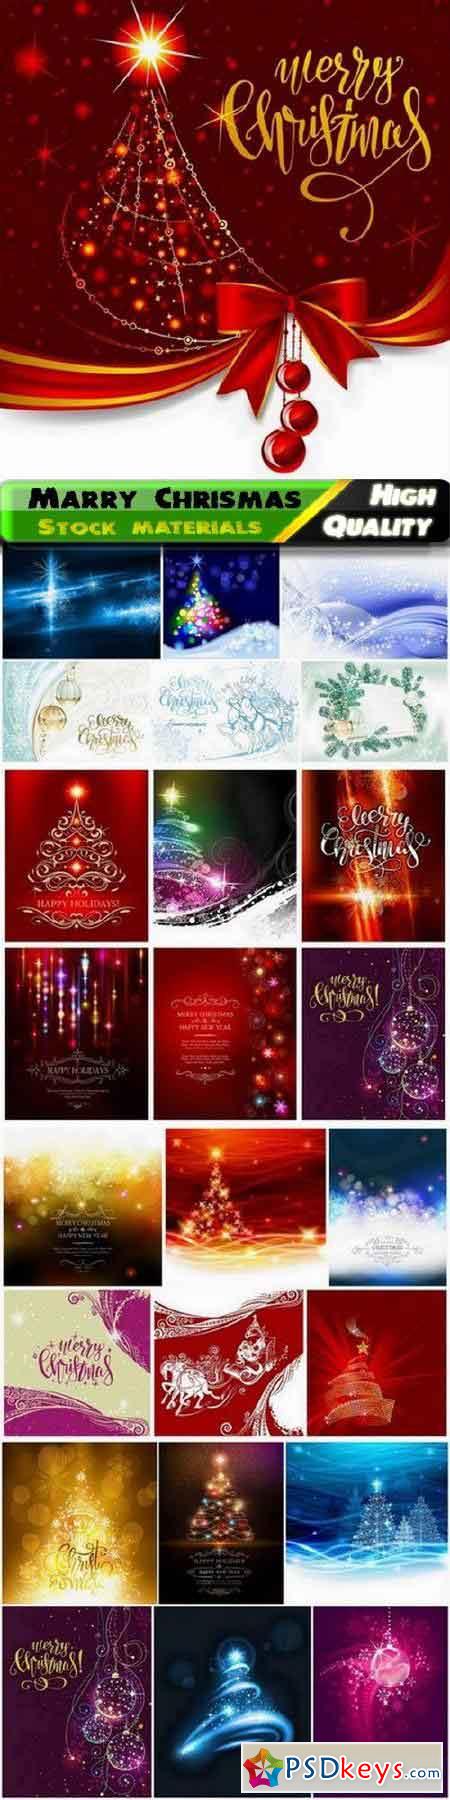 Merry Christmas and happy New Year holiday card - 25 Eps